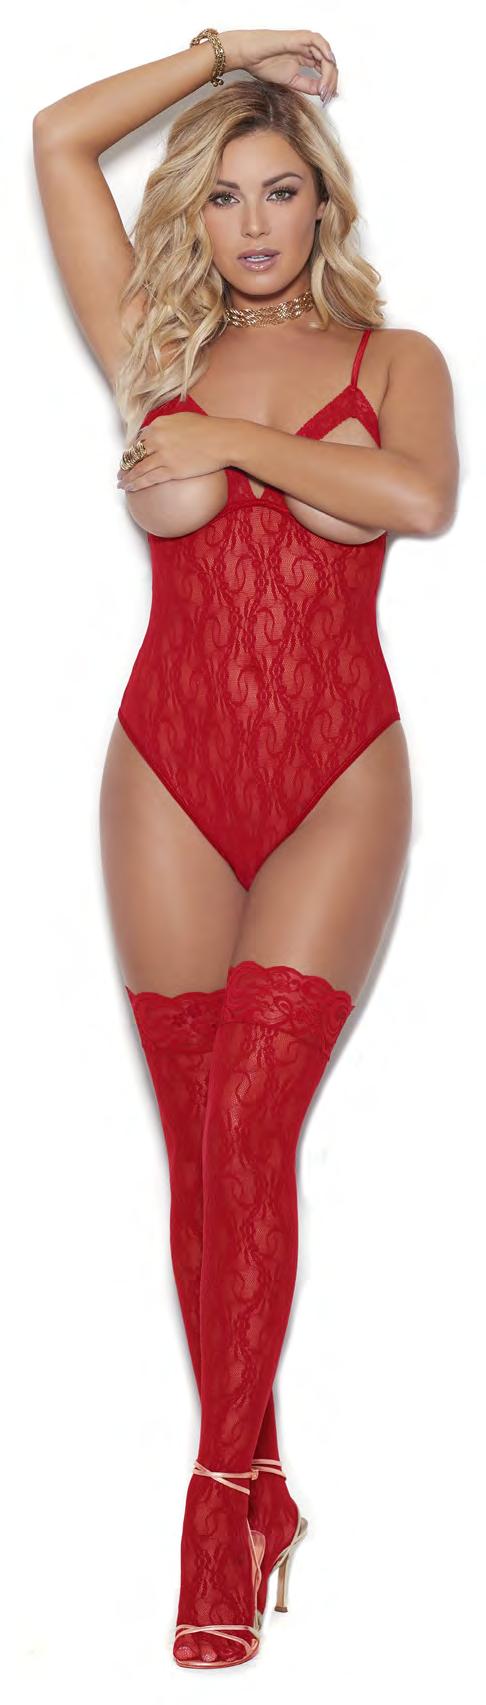 Hose 14 13005 Cupless stretch lace teddy and matching thigh hi s with lace top.